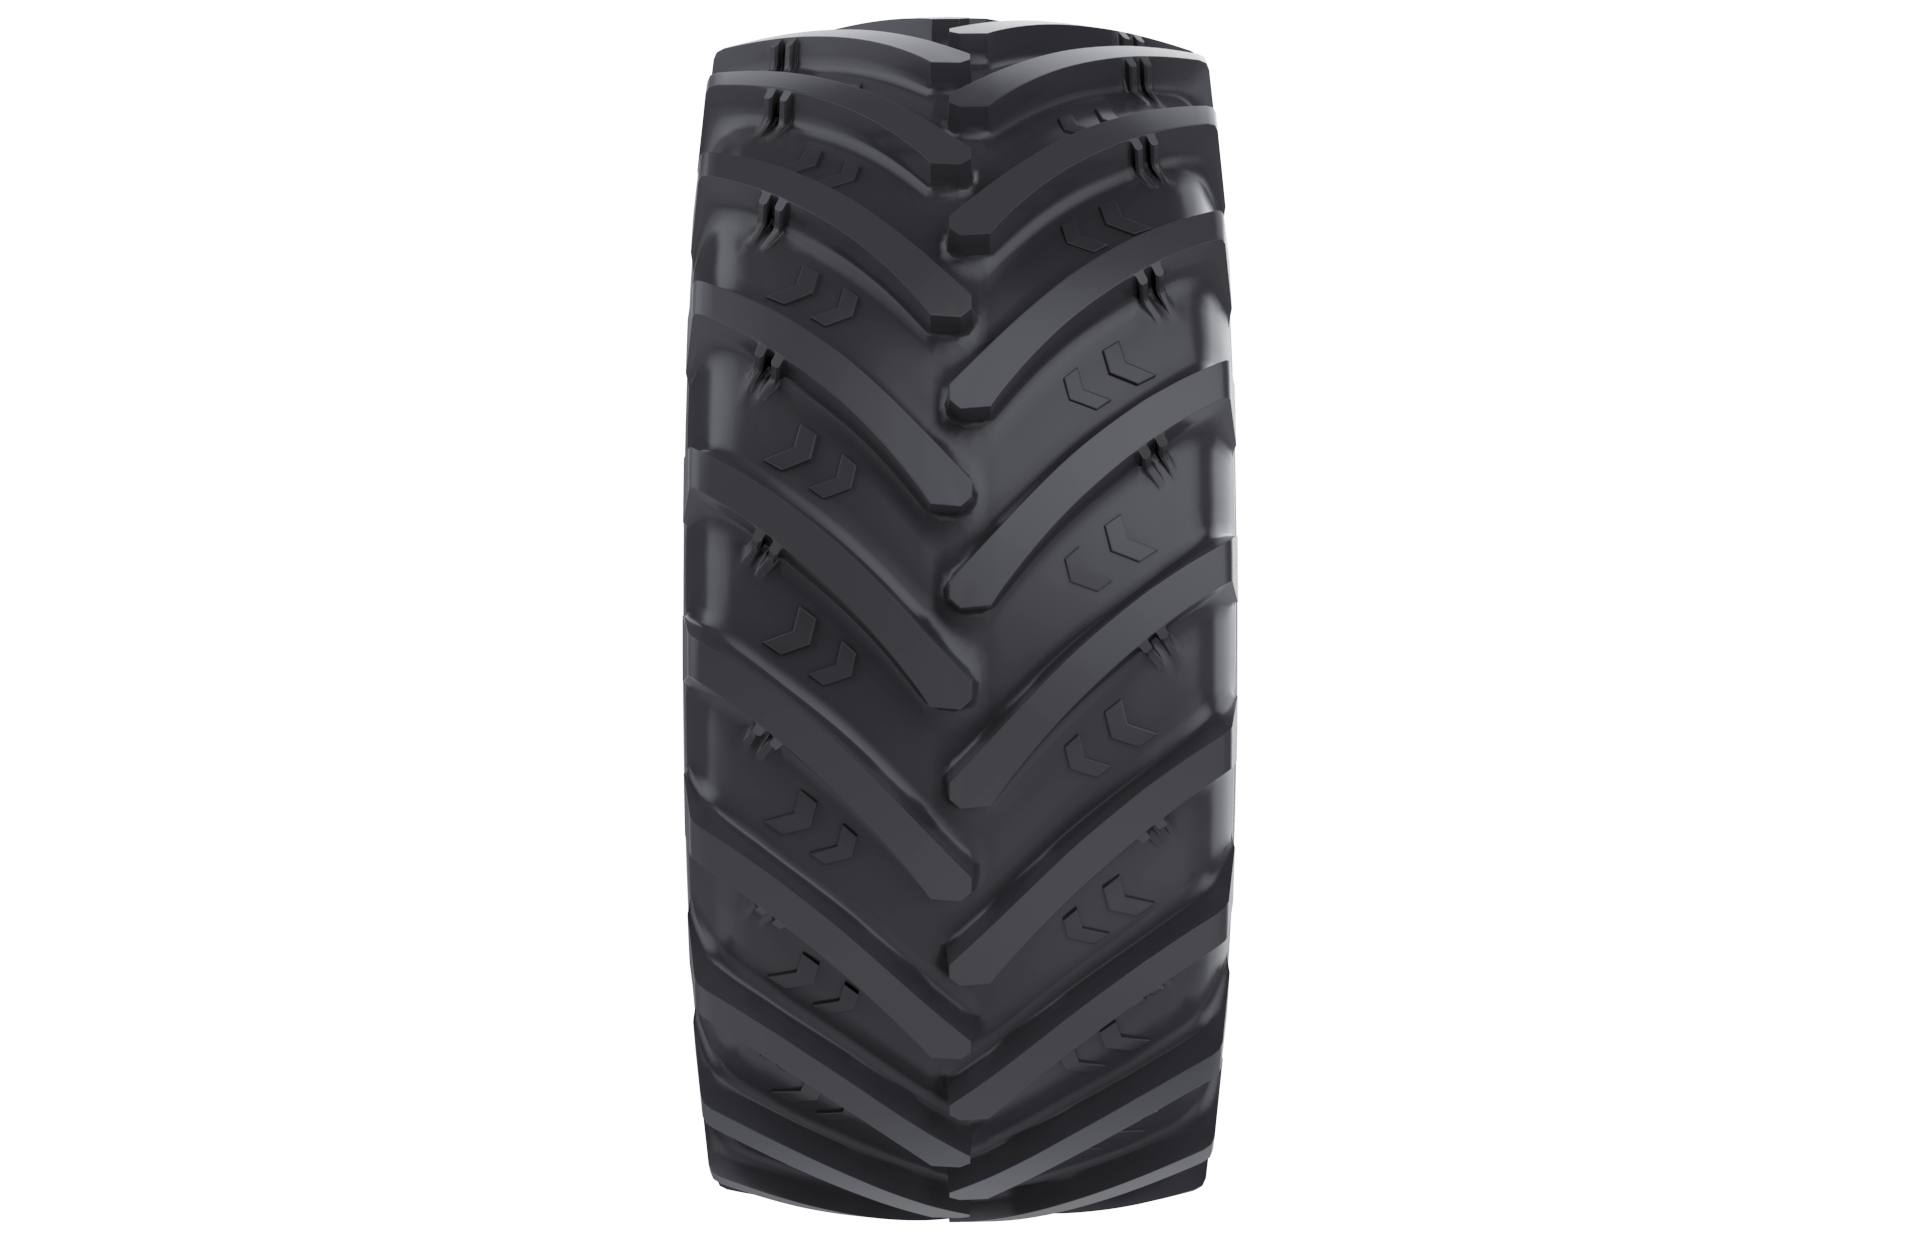 ASCENSO 650/75R32 172A8 R1 TL HRR200 STEEL BELTED